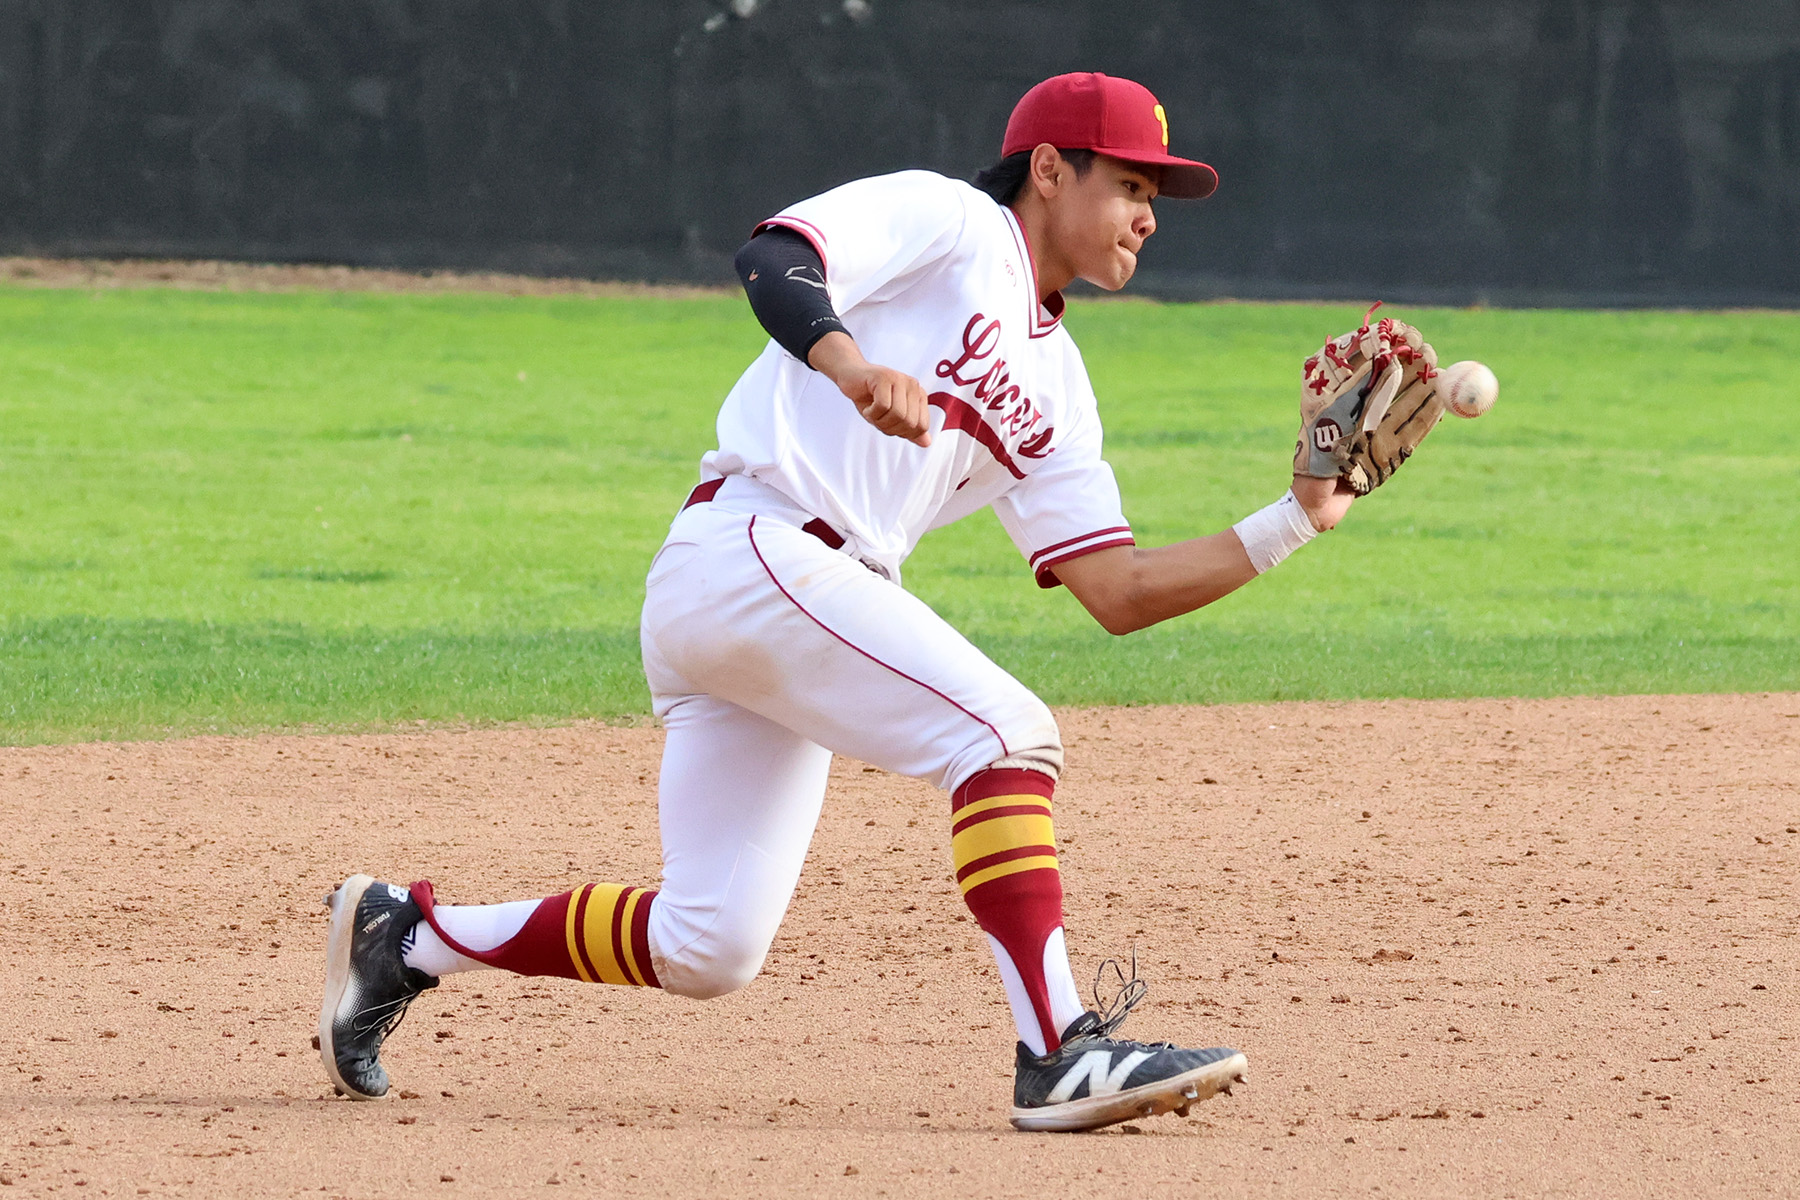 Letterman shortstop Jack Esguerra has been steady for the Lancers baseball team (photo by Richard Quinton).